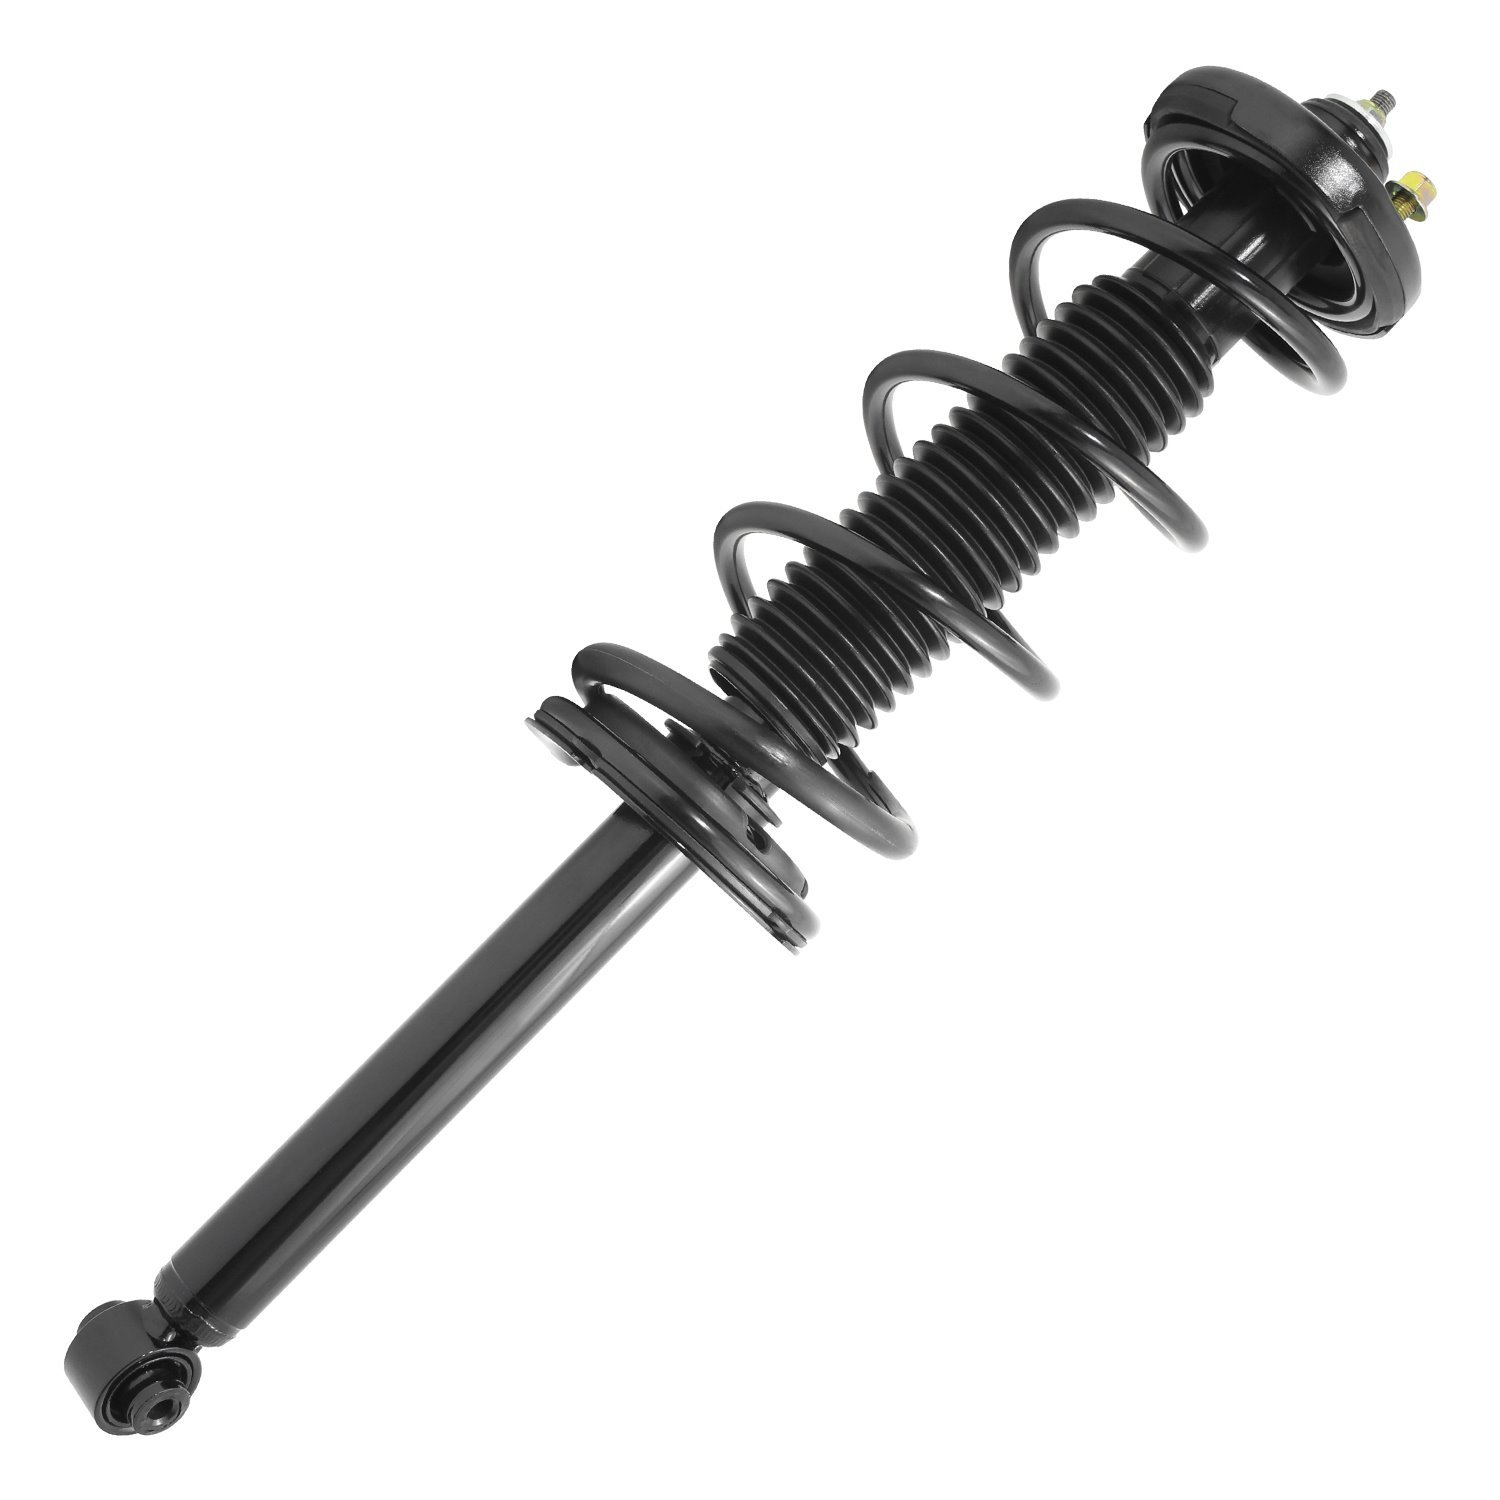 15100 Suspension Strut & Coil Spring Assembly Fits Select Acura TL